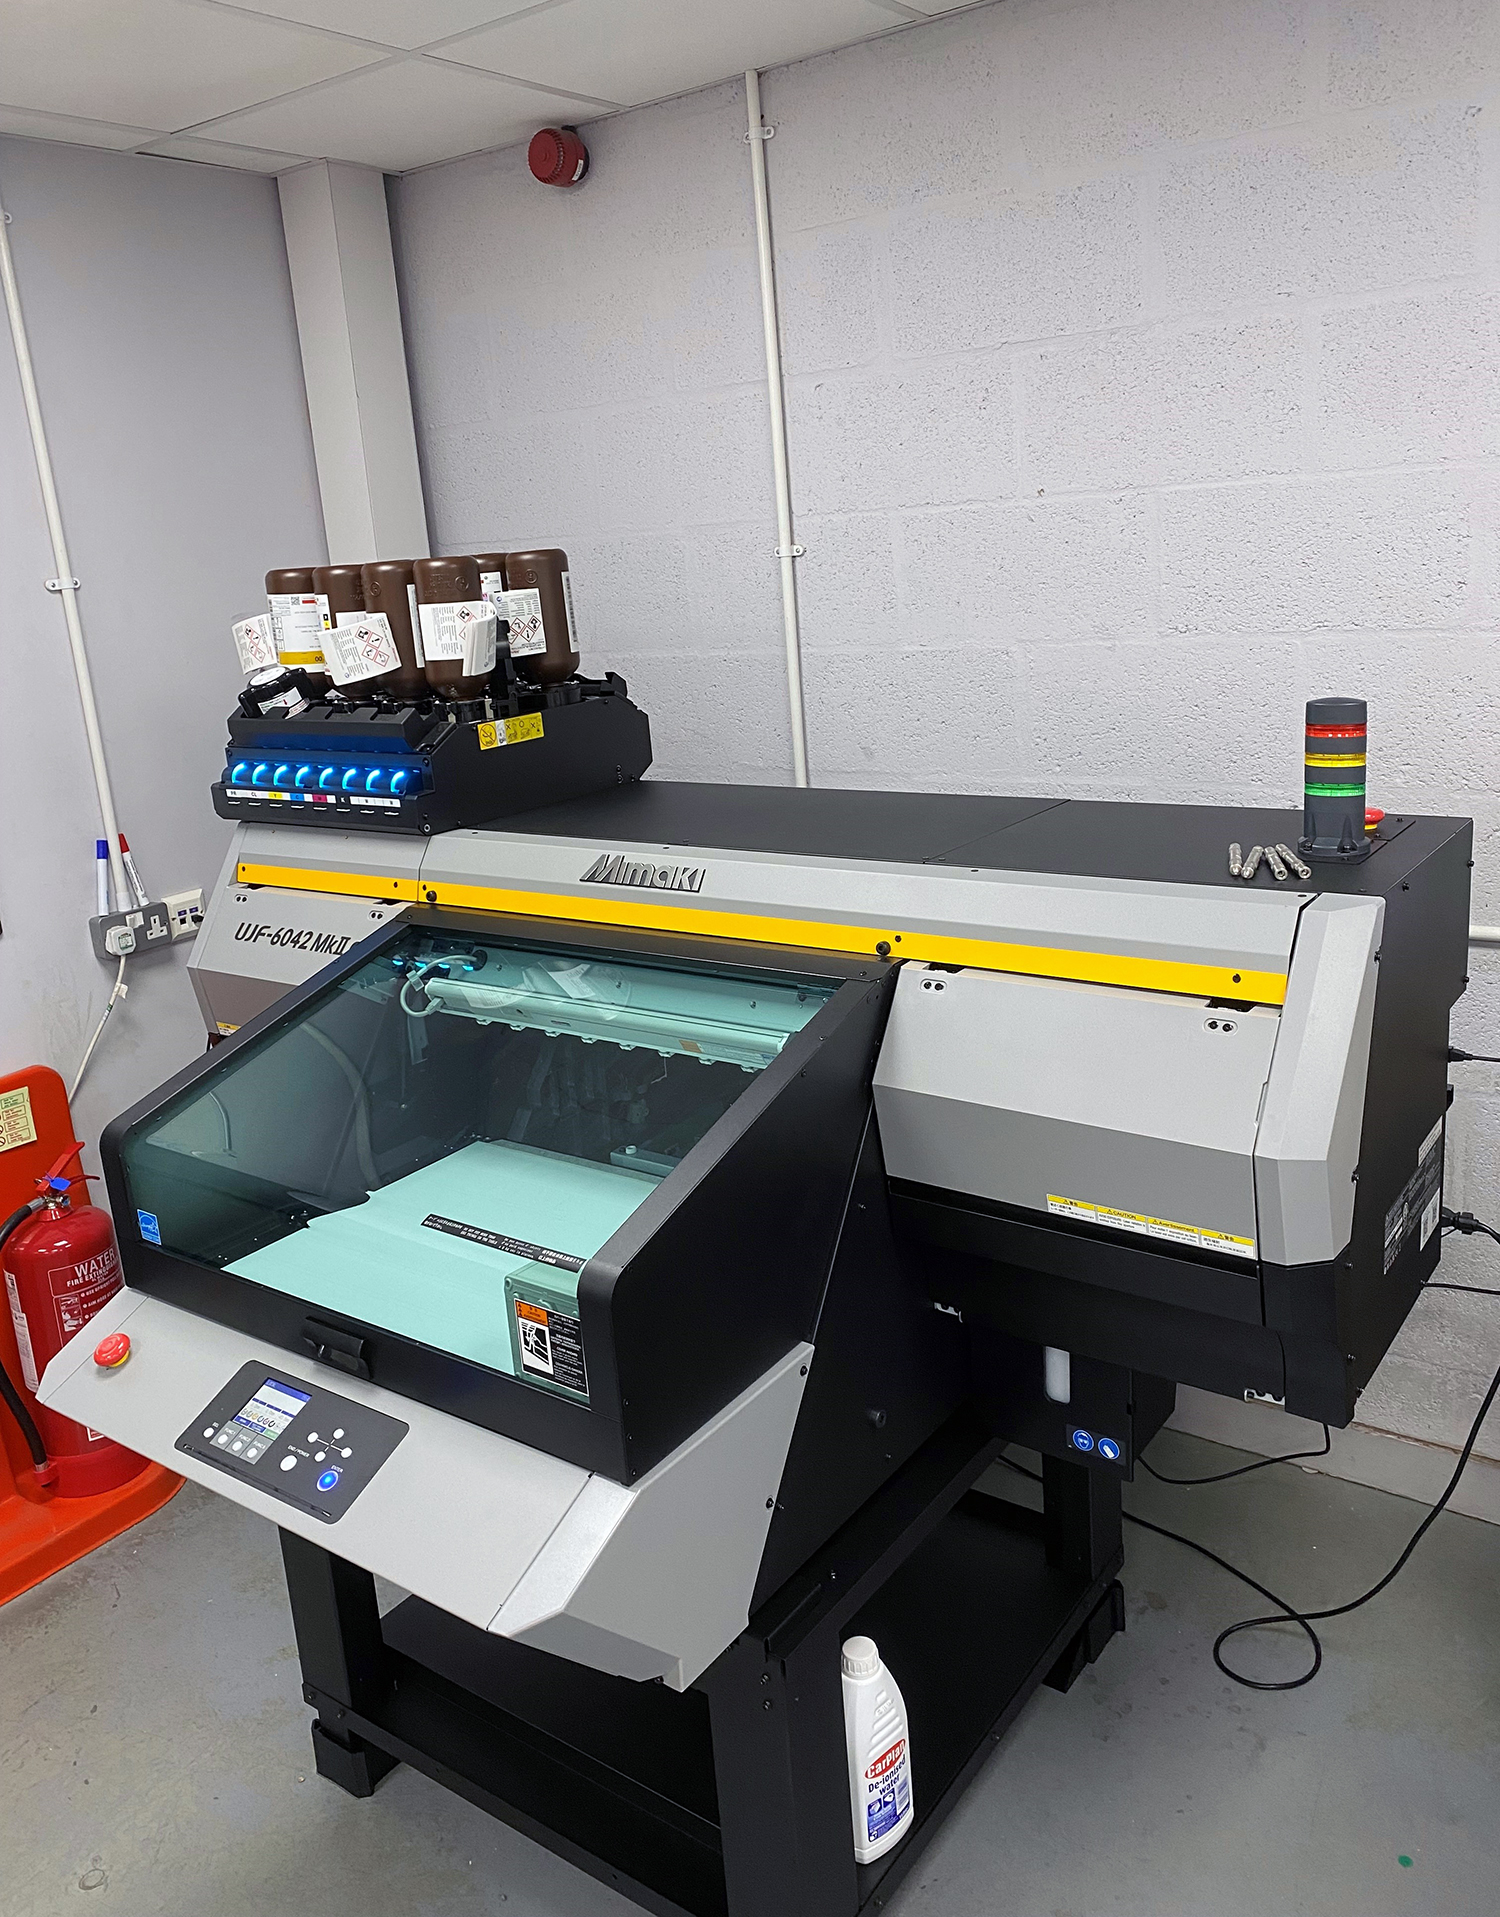 Spelsberg UK, has added bespoke printing capabilities to its range of in-house services.